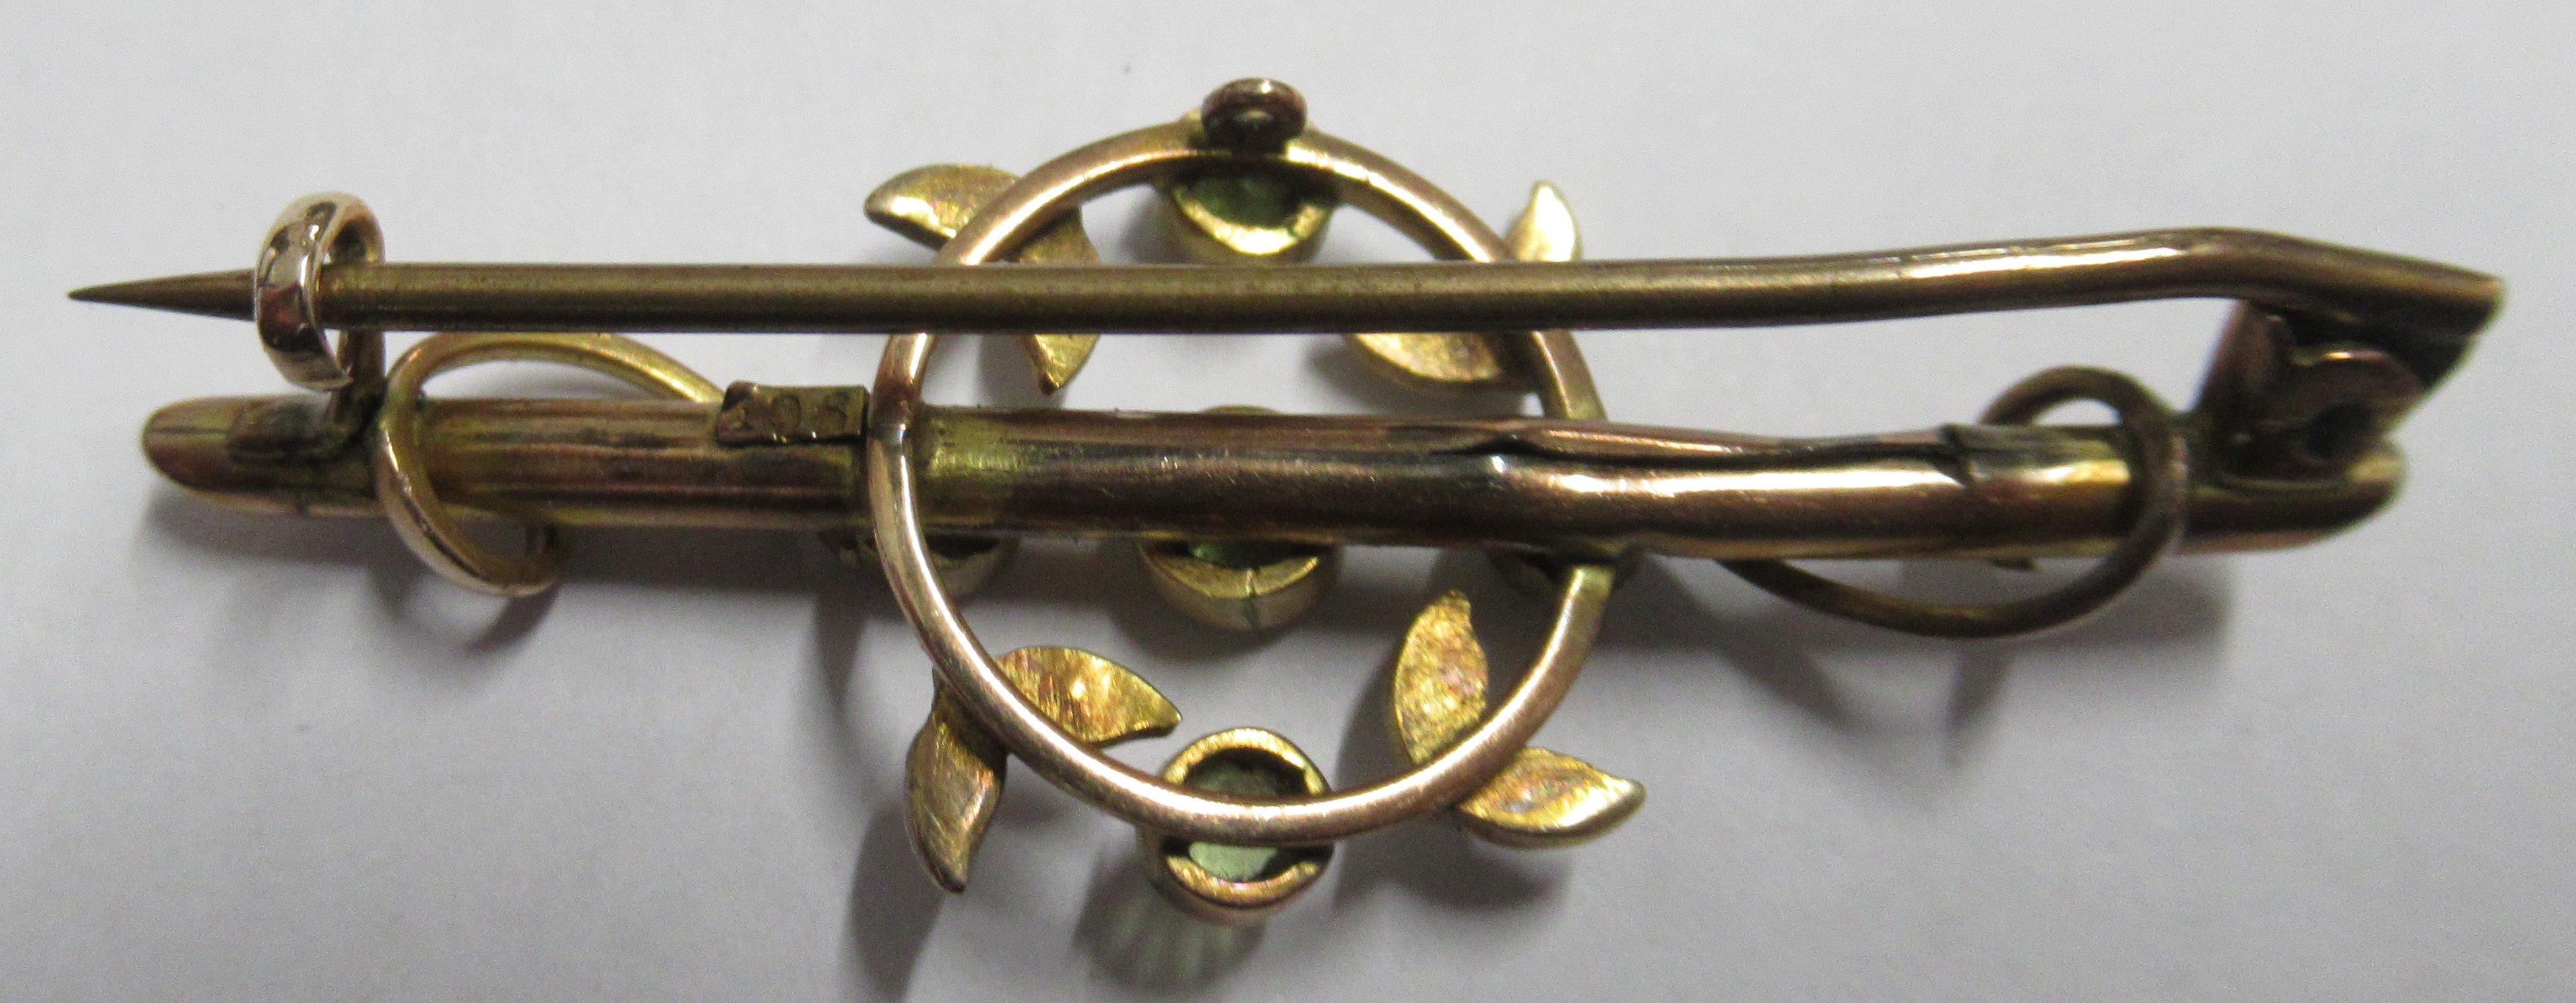 A Victorian 9ct gold bar brooch, set with peridot and seed pearls - Image 3 of 3